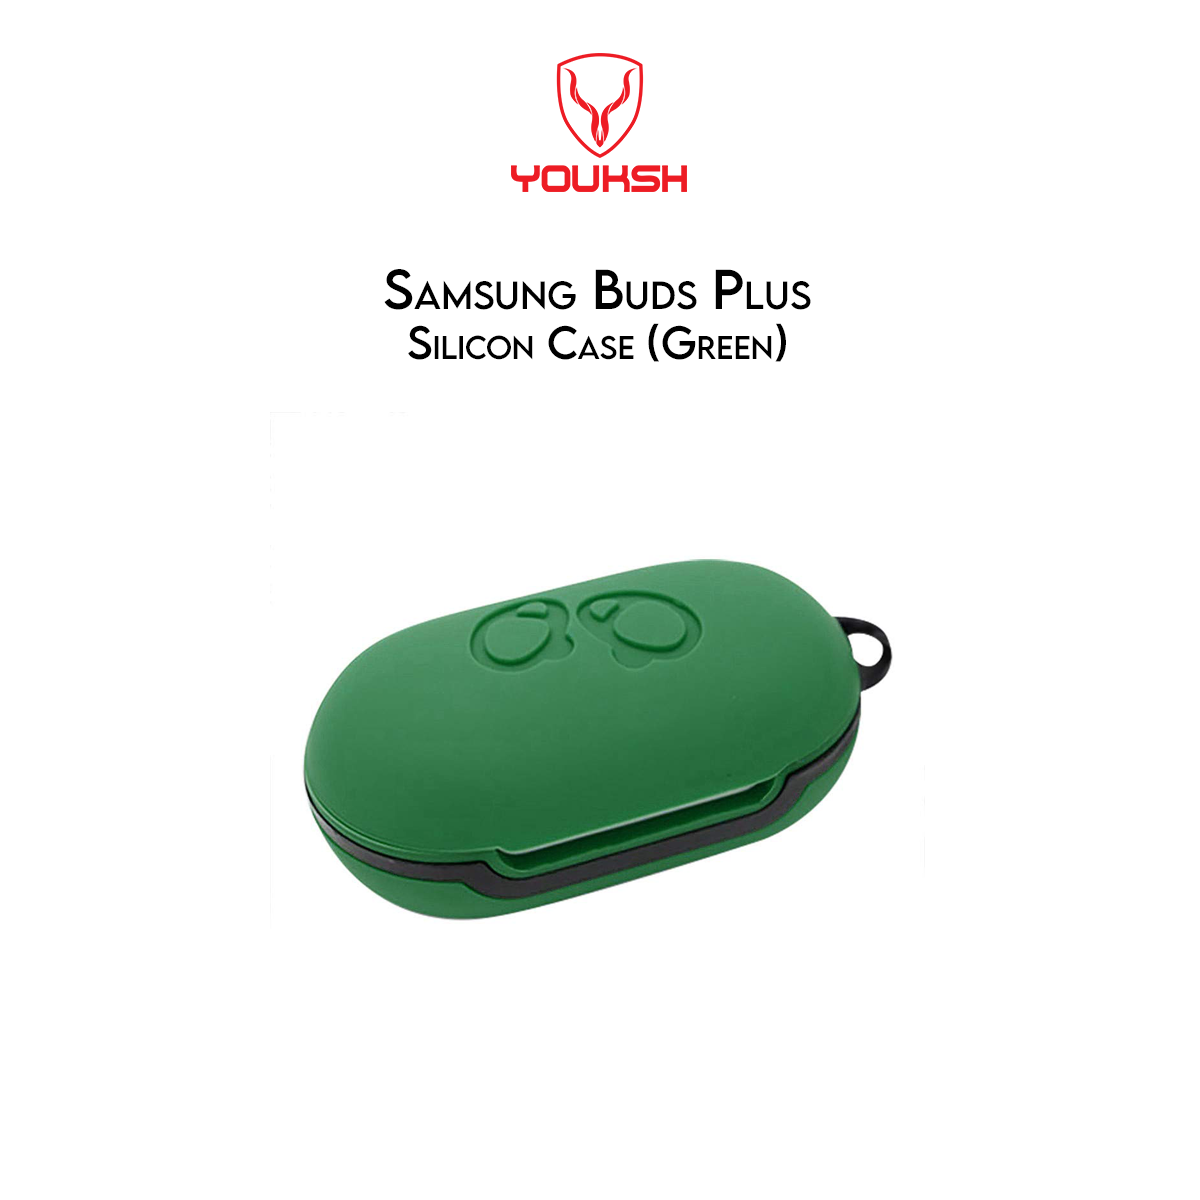 Samsung Galaxy Buds Plus - Youksh Silicone case - High Quailty Shock Proof Case Only.